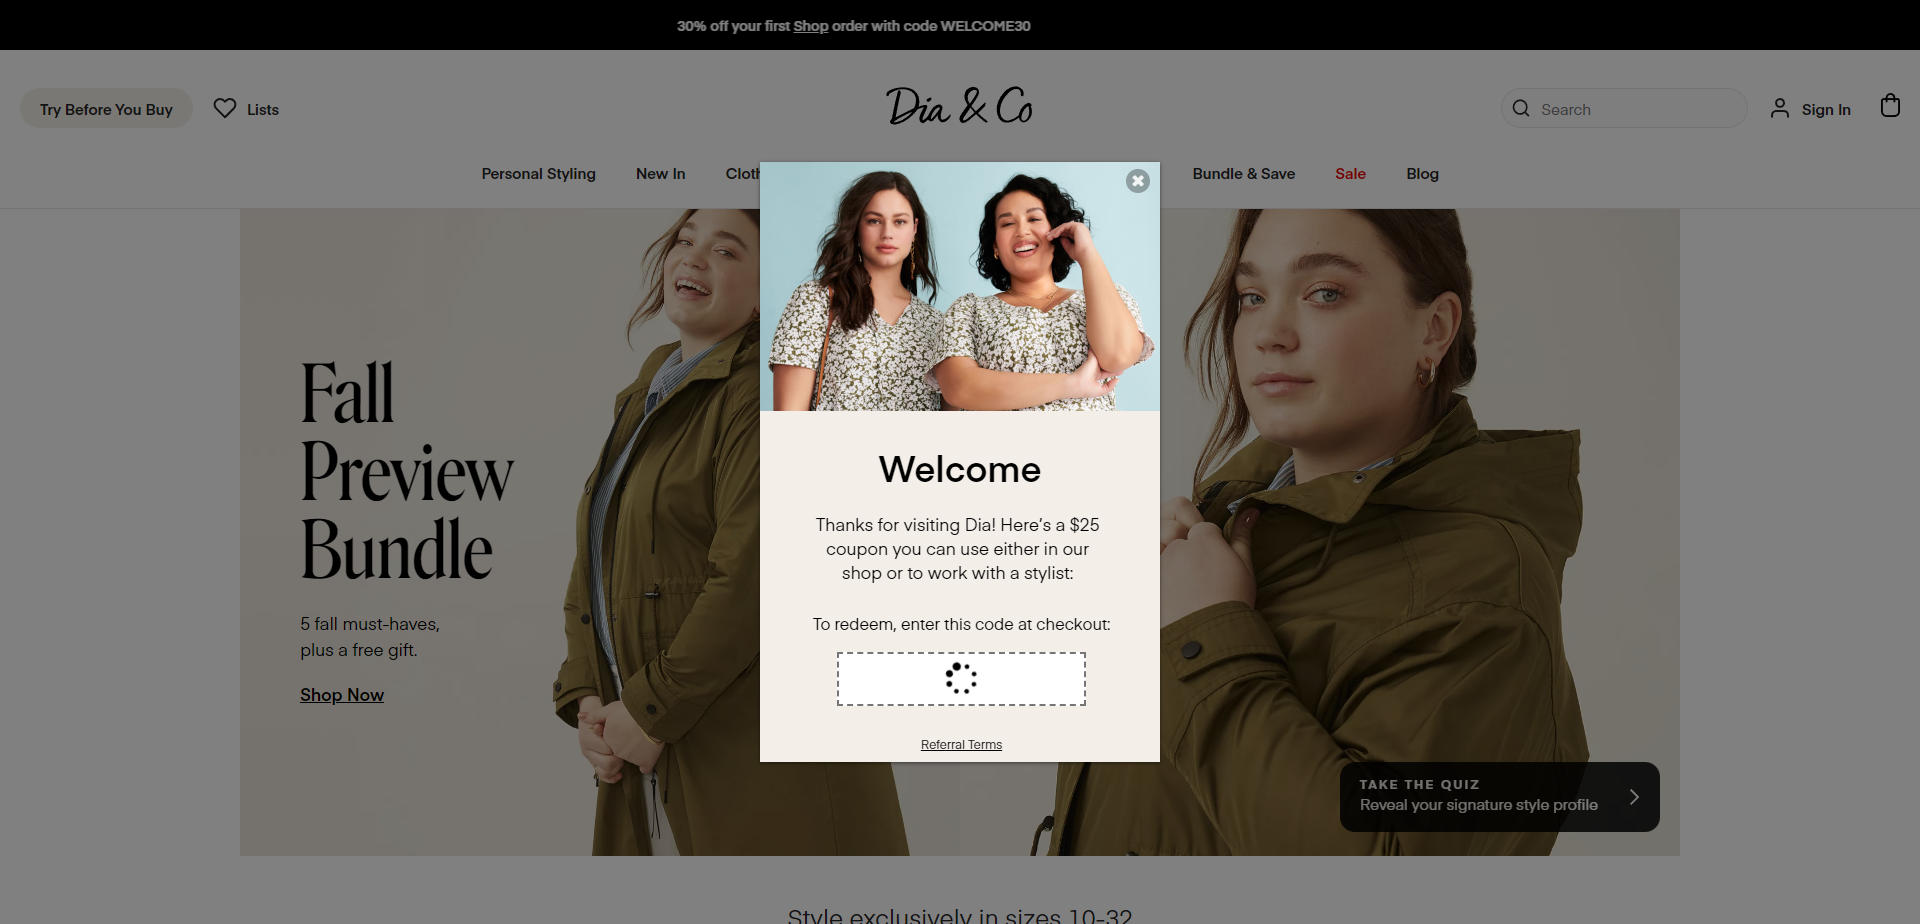 Referral Landing Page for Dia